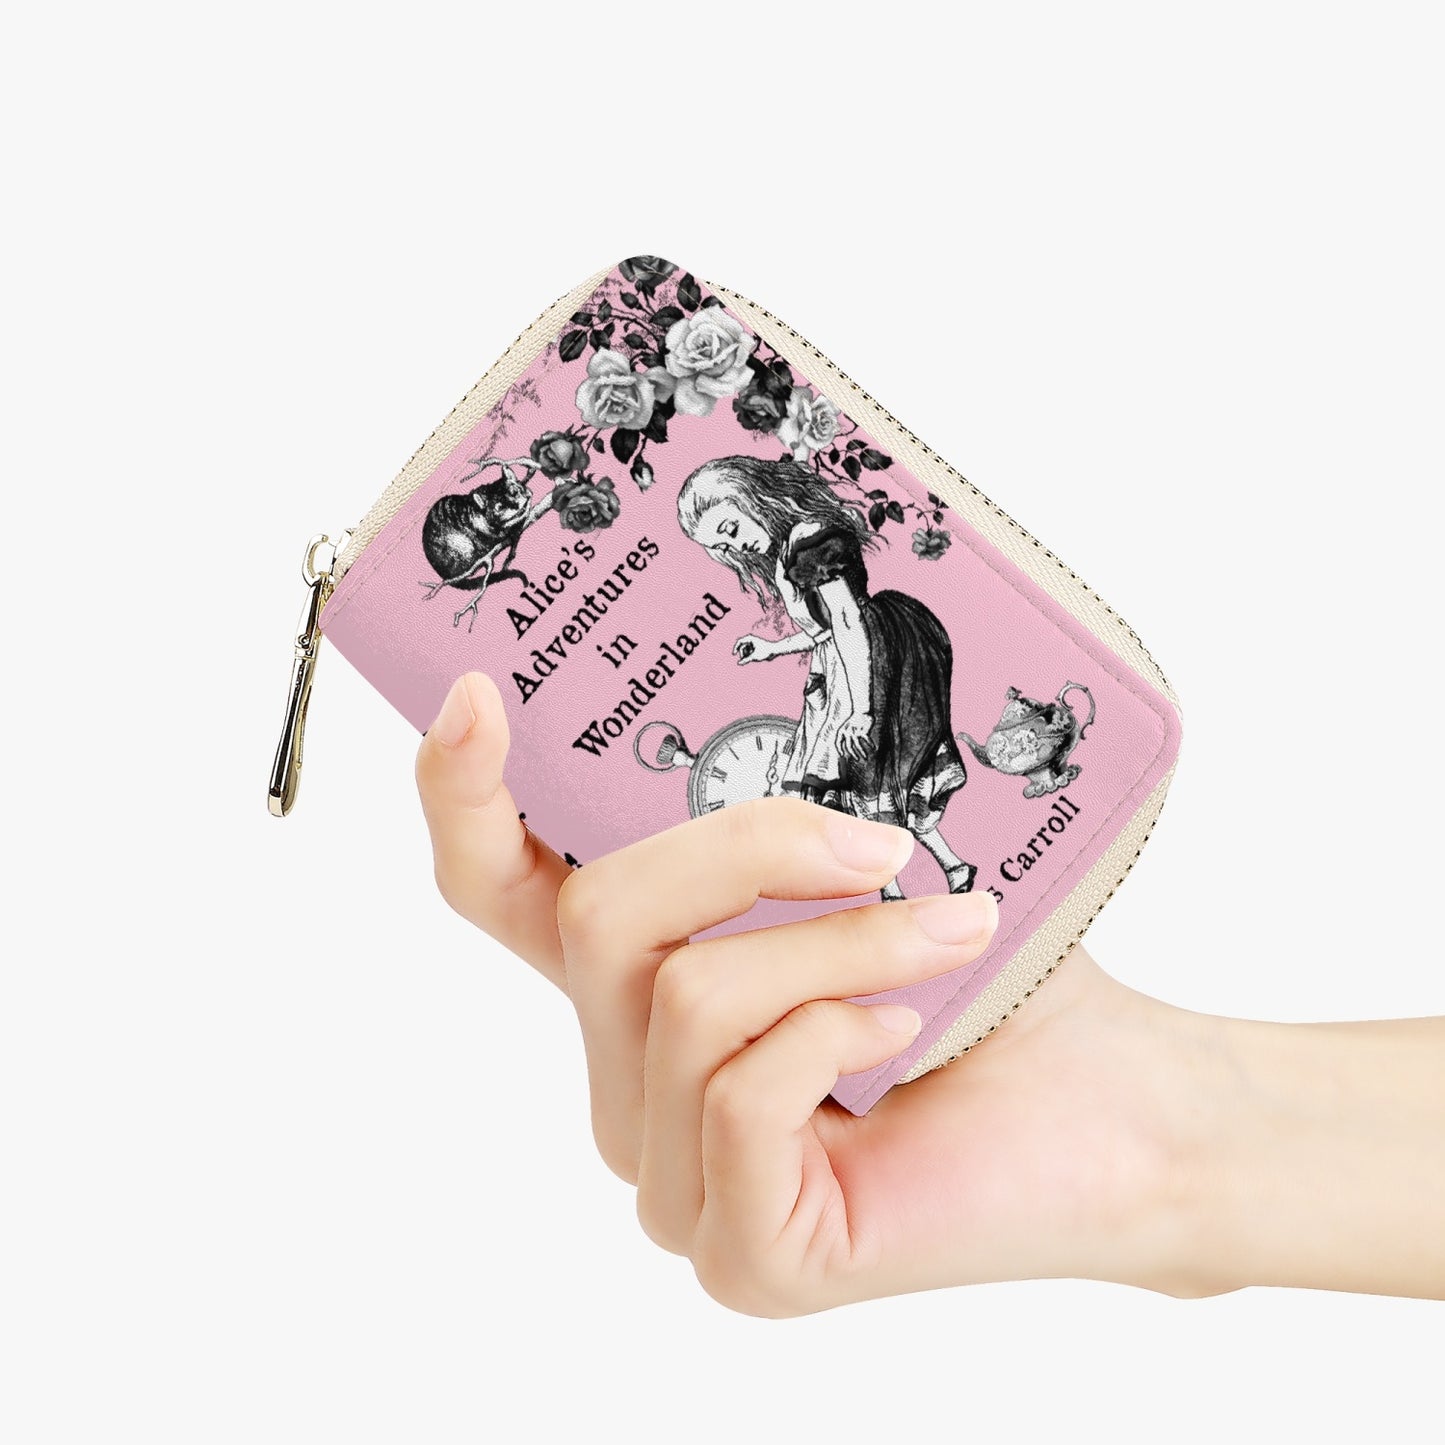 Alice in Wonderland Pink Card Holder Wallet - Through the Looking Glass Purse (JPLCPINK)